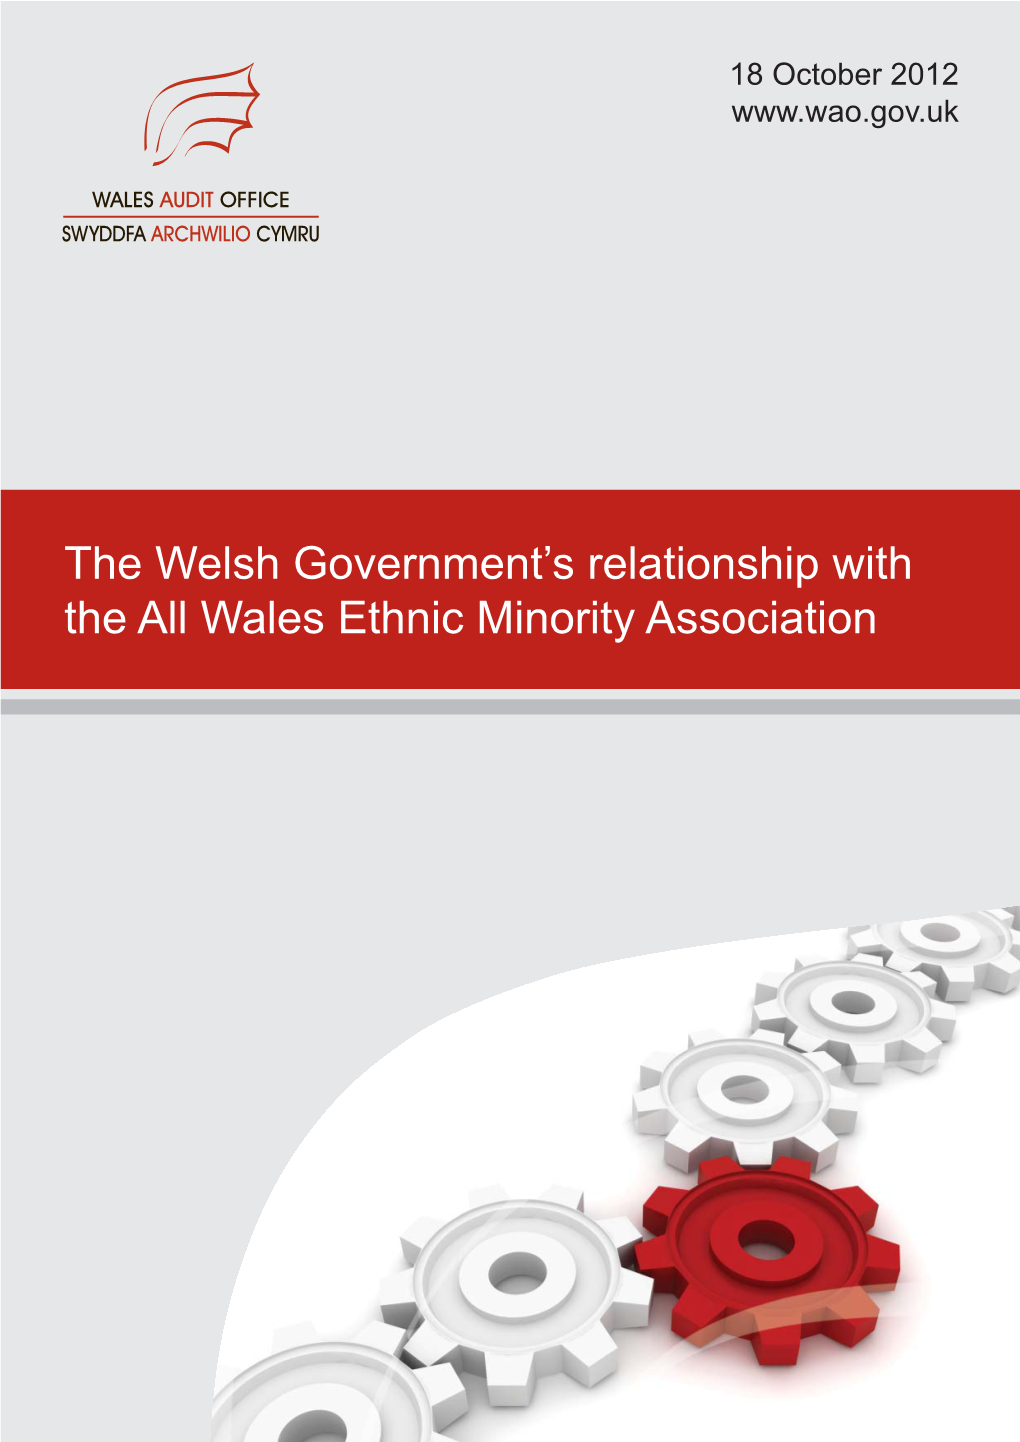 The Welsh Government's Relationship with the All Wales Ethnic Minority